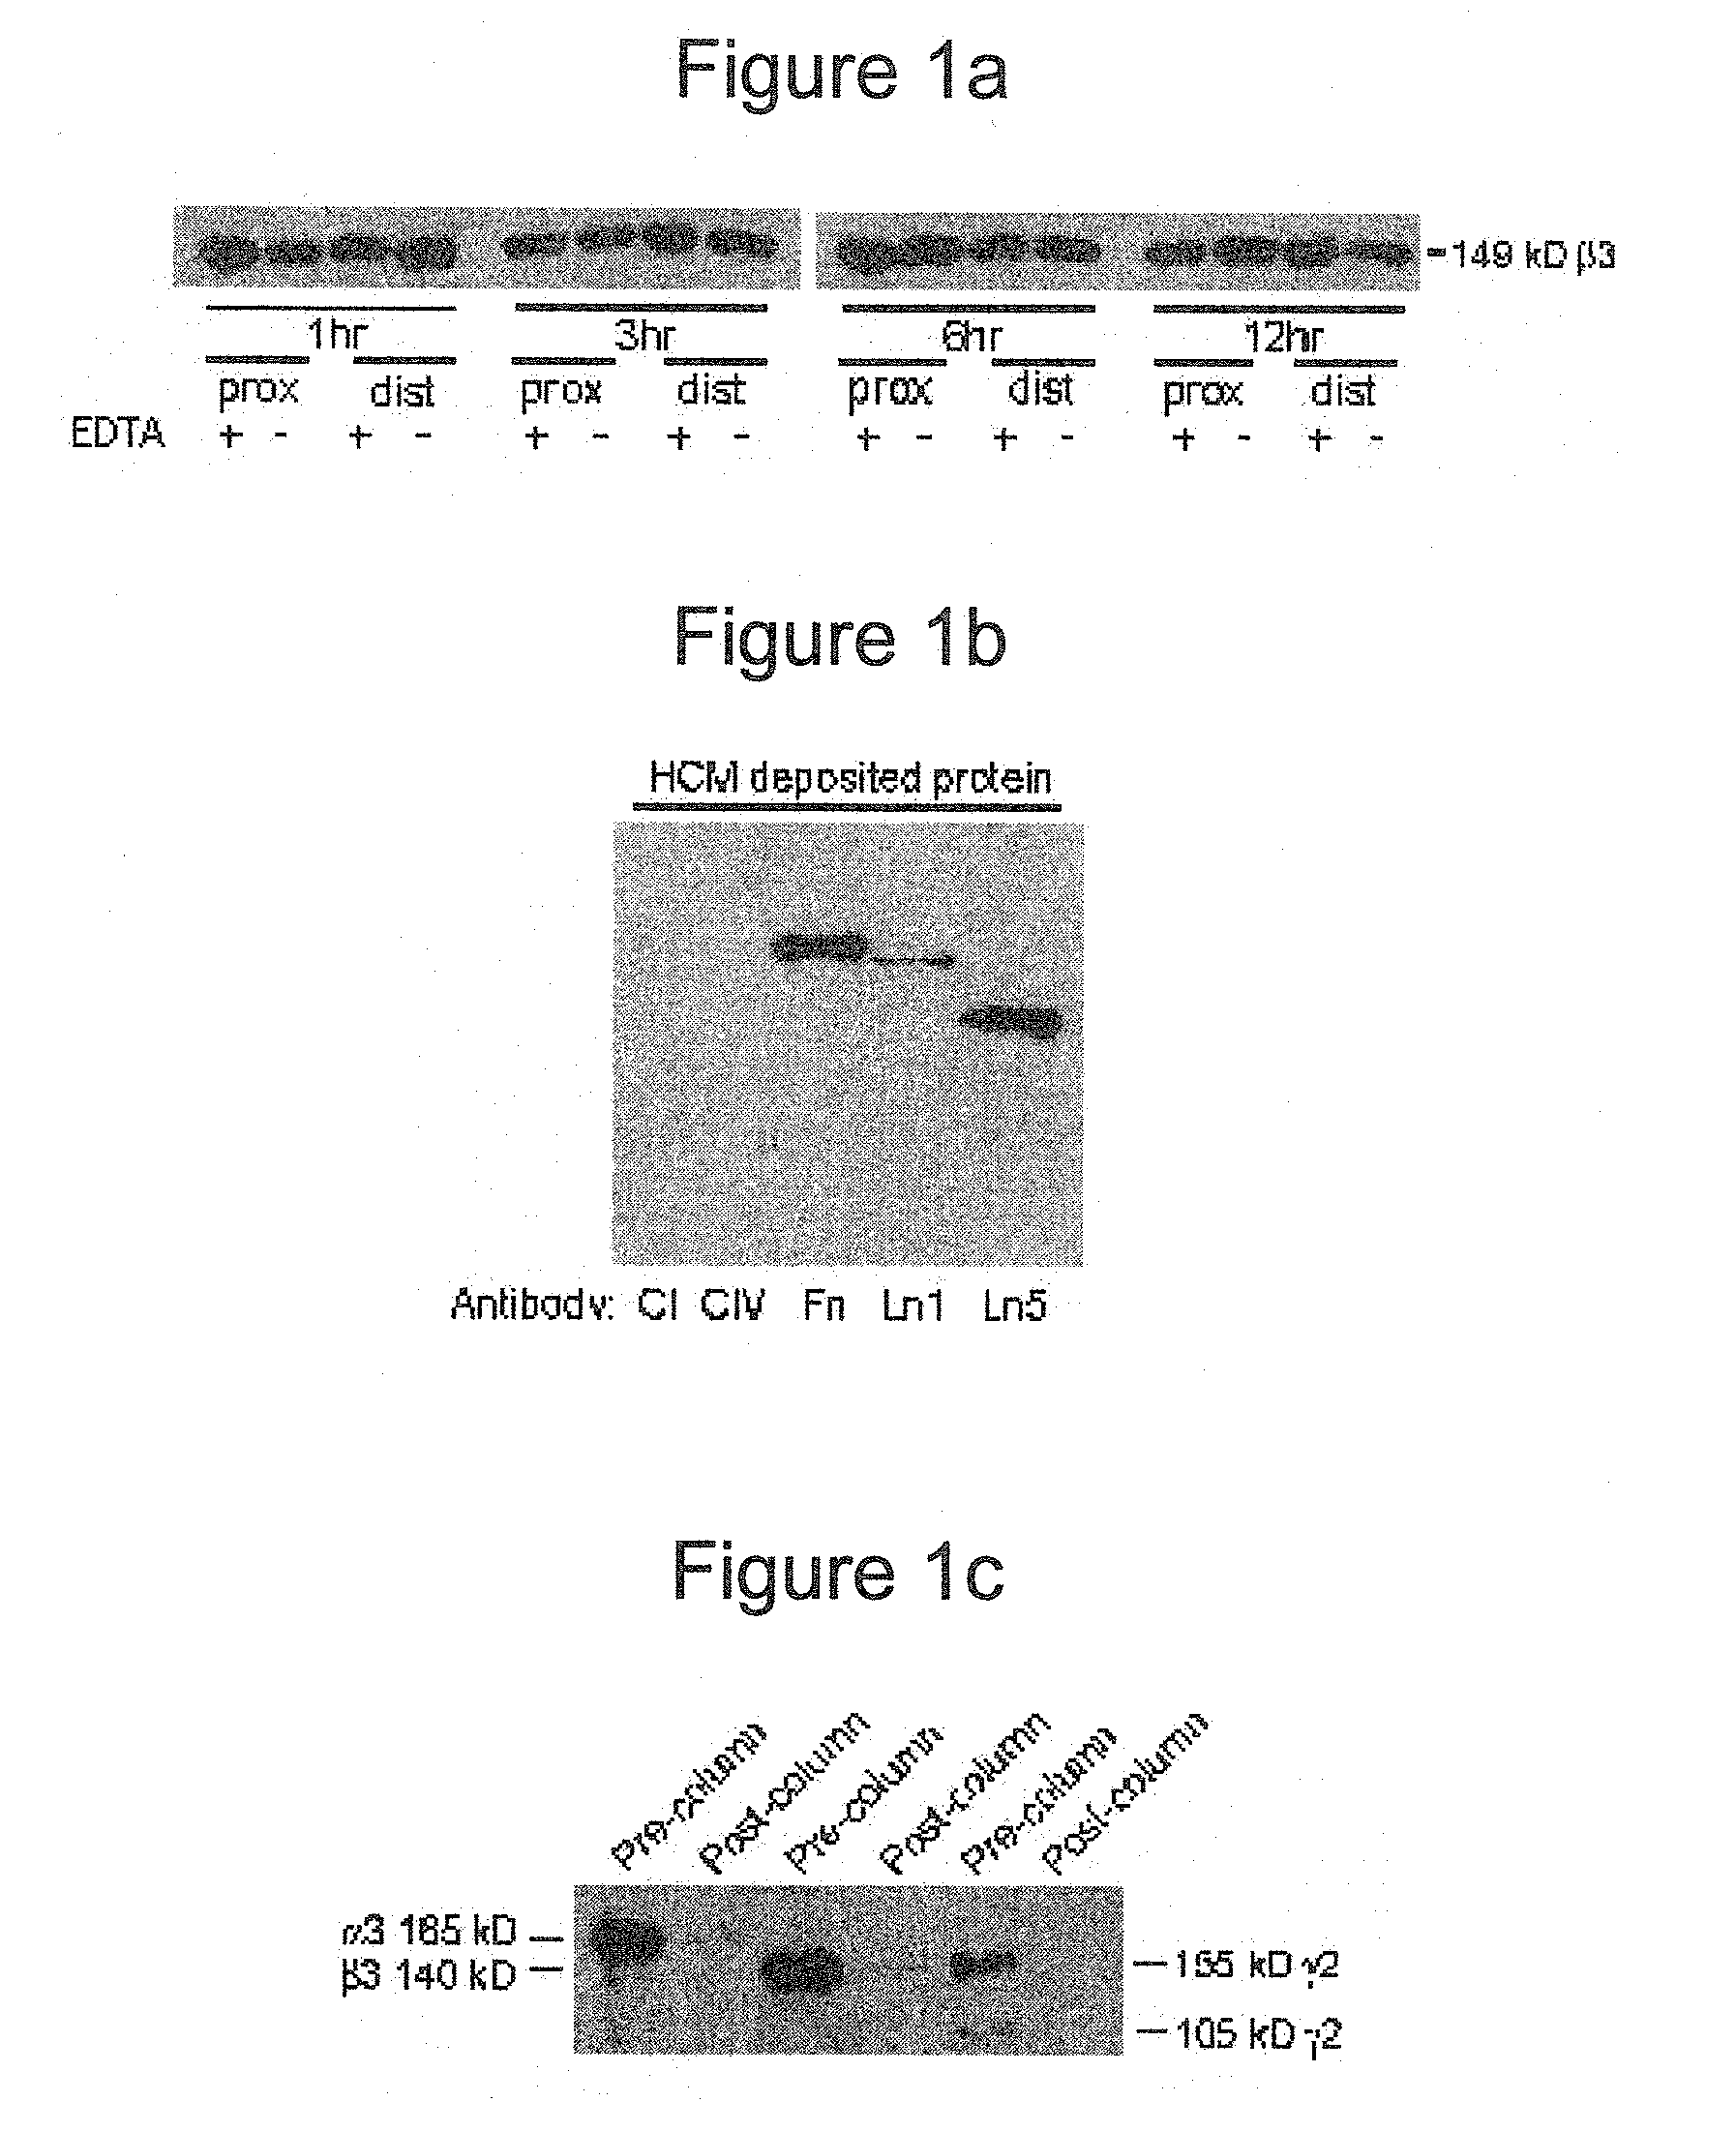 Implantable medical articles having laminin coatings and methods of use